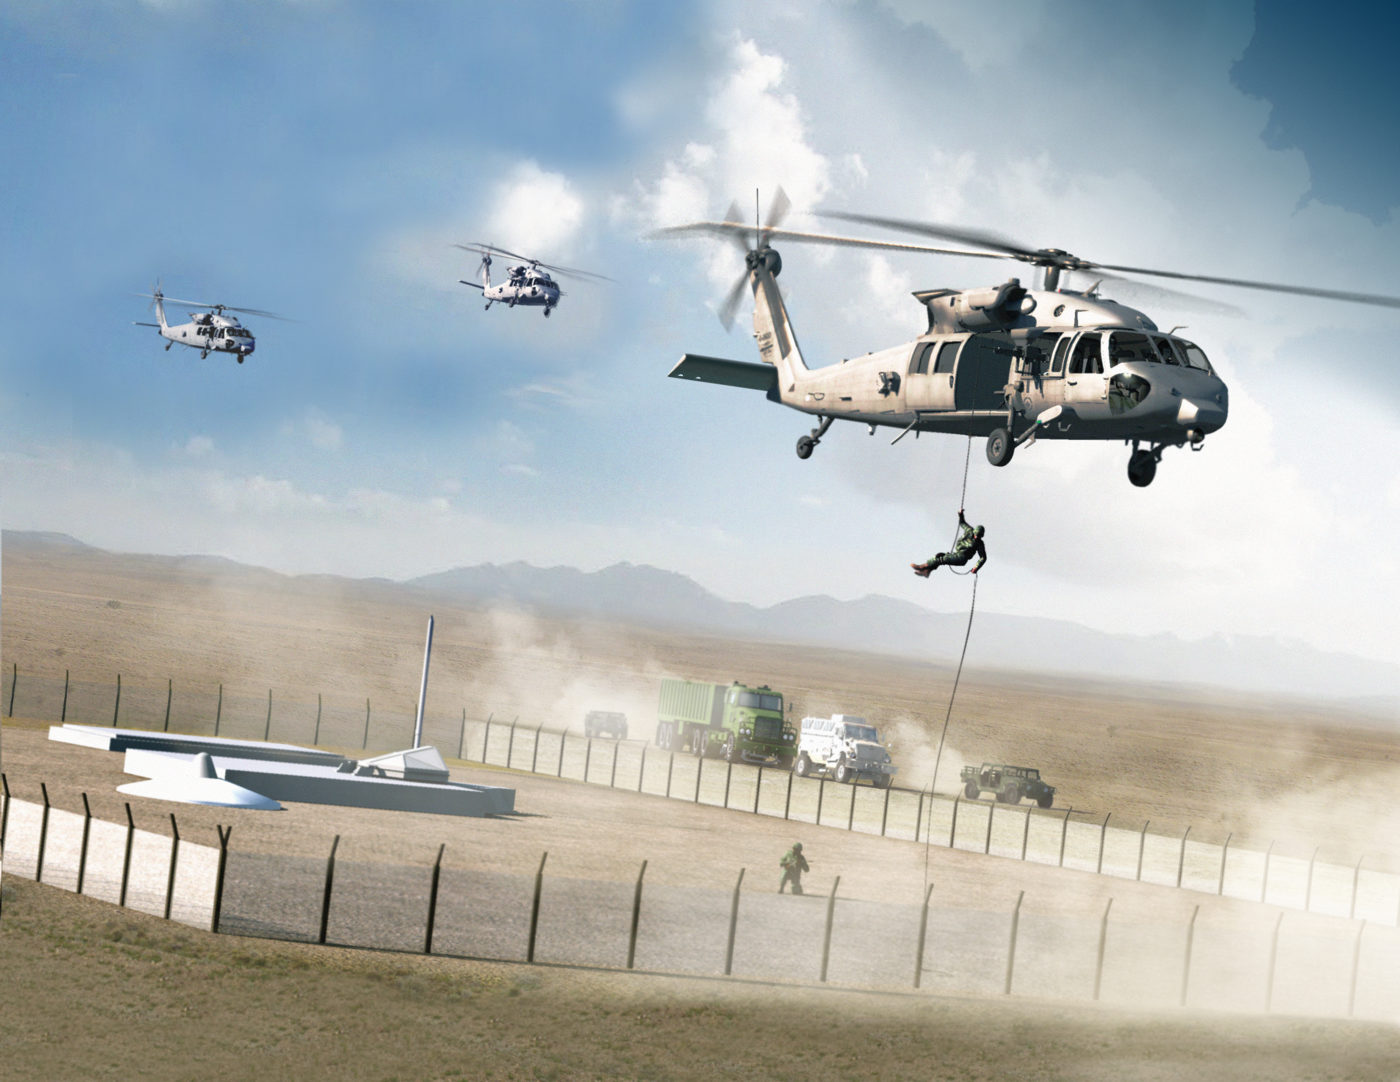 Missions for the HH-60U would include missile silo protection.